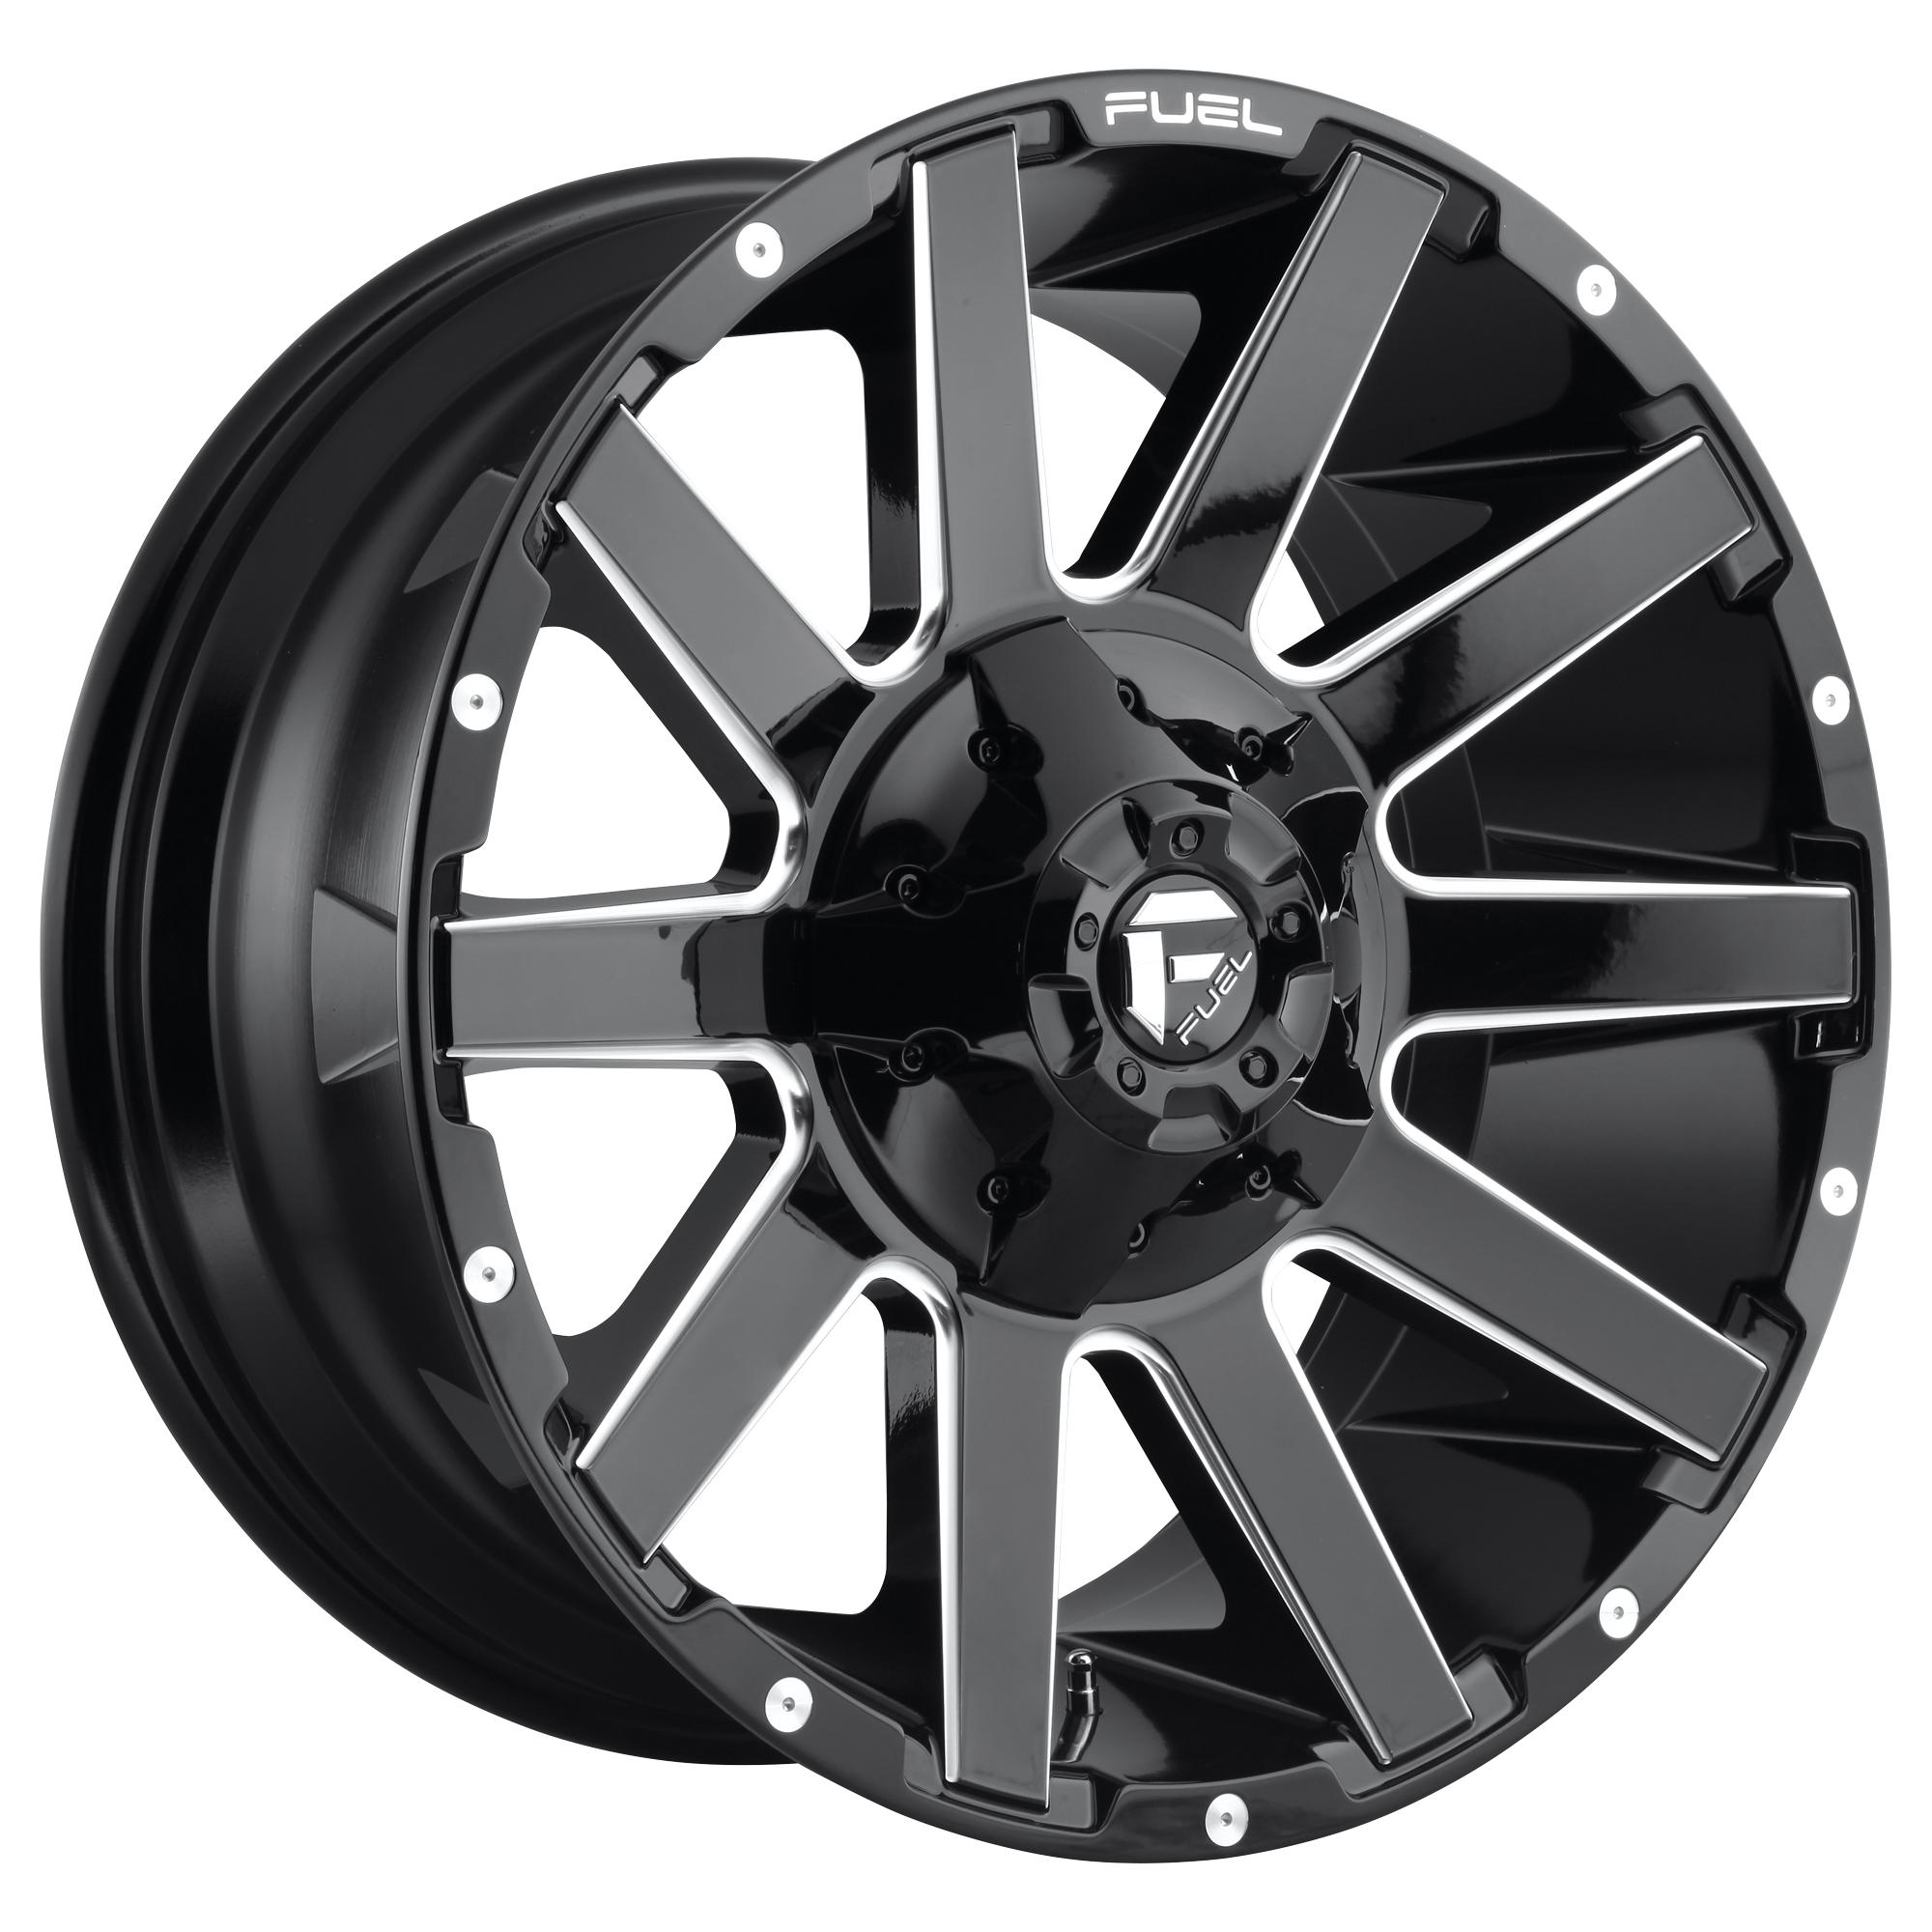 CONTRA 20x9 8x170.00 GLOSS BLACK MILLED (20 mm) - Tires and Engine Performance